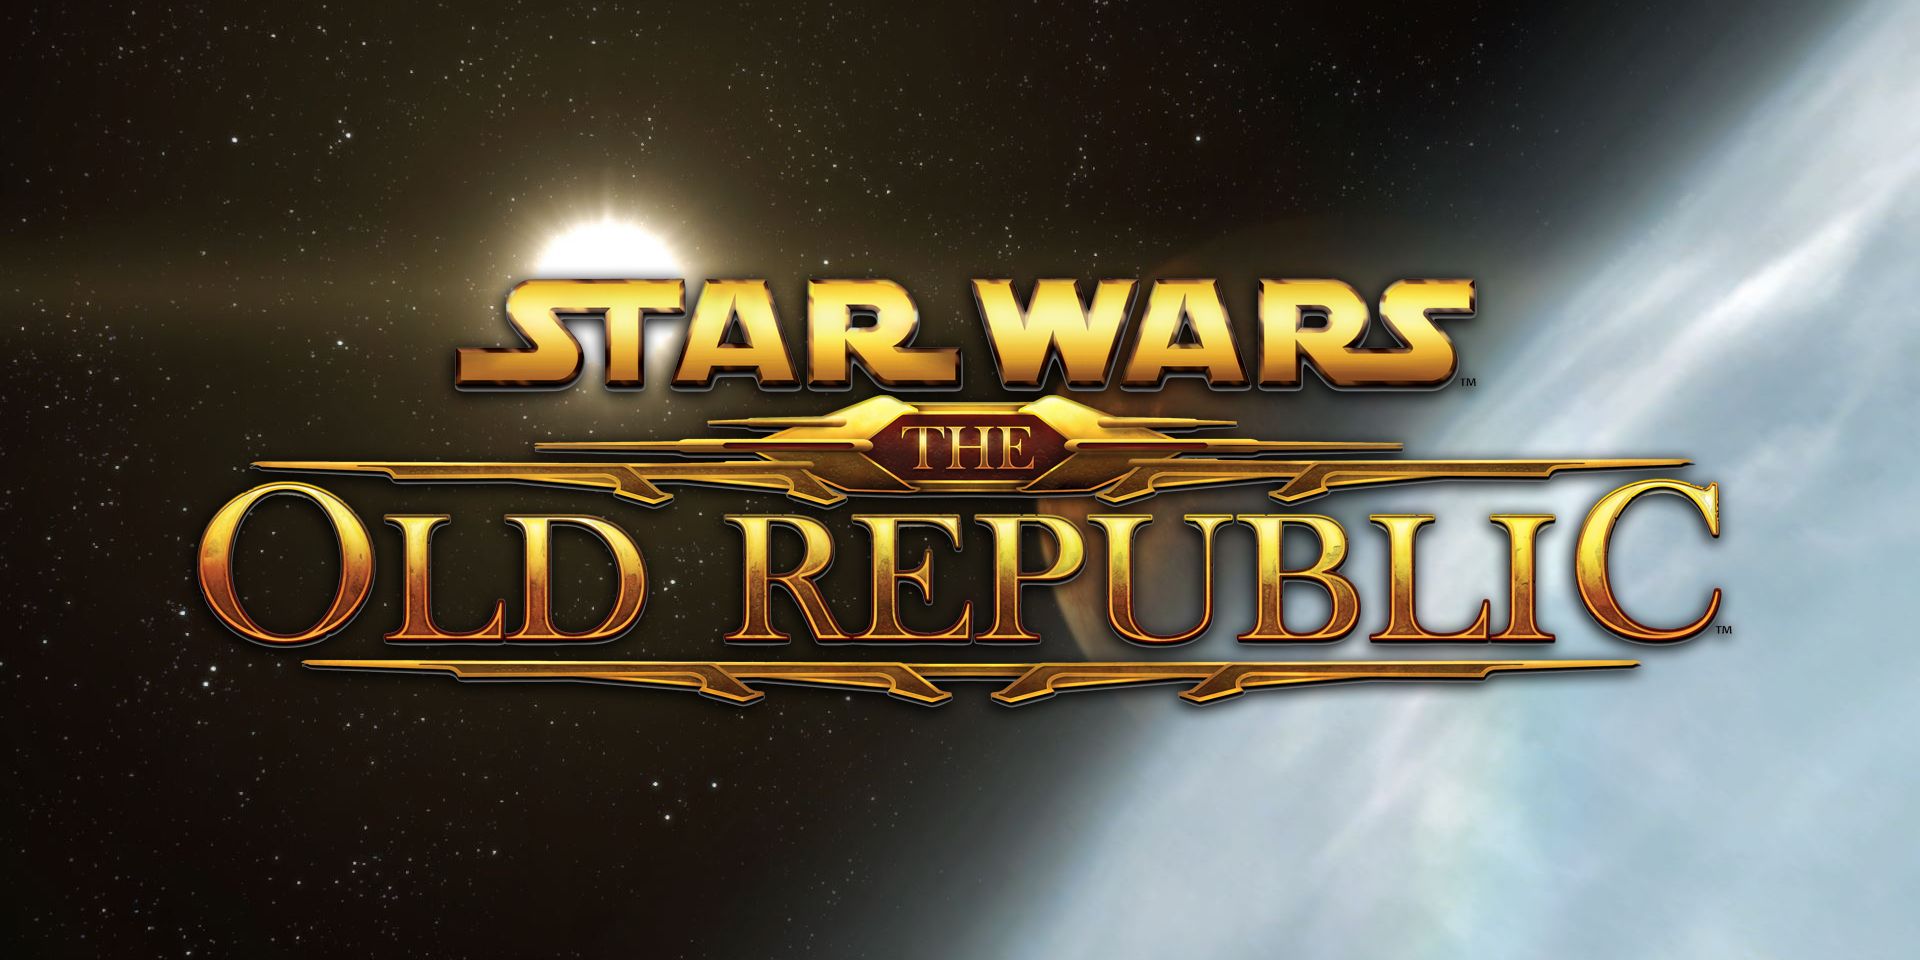 SWTOR main title against space background